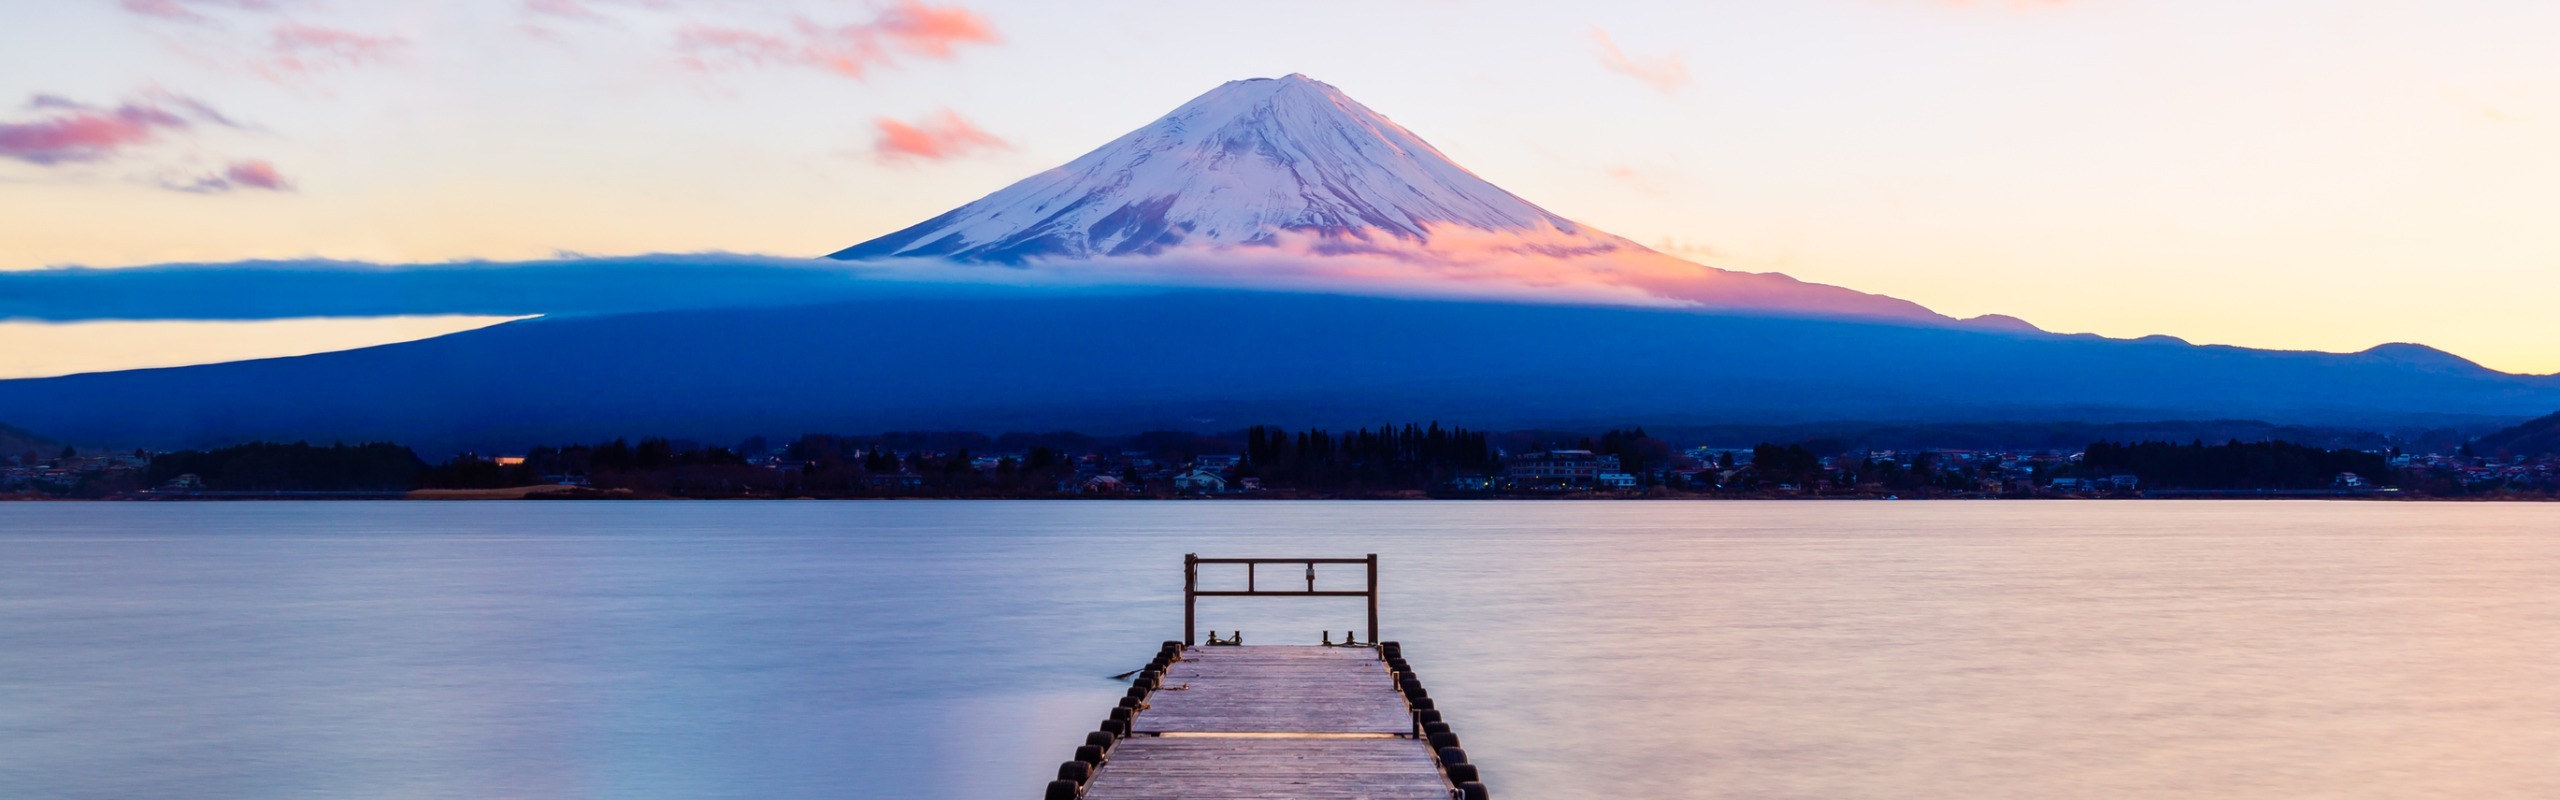 10 Days in Japan: Top 5 Itineraries